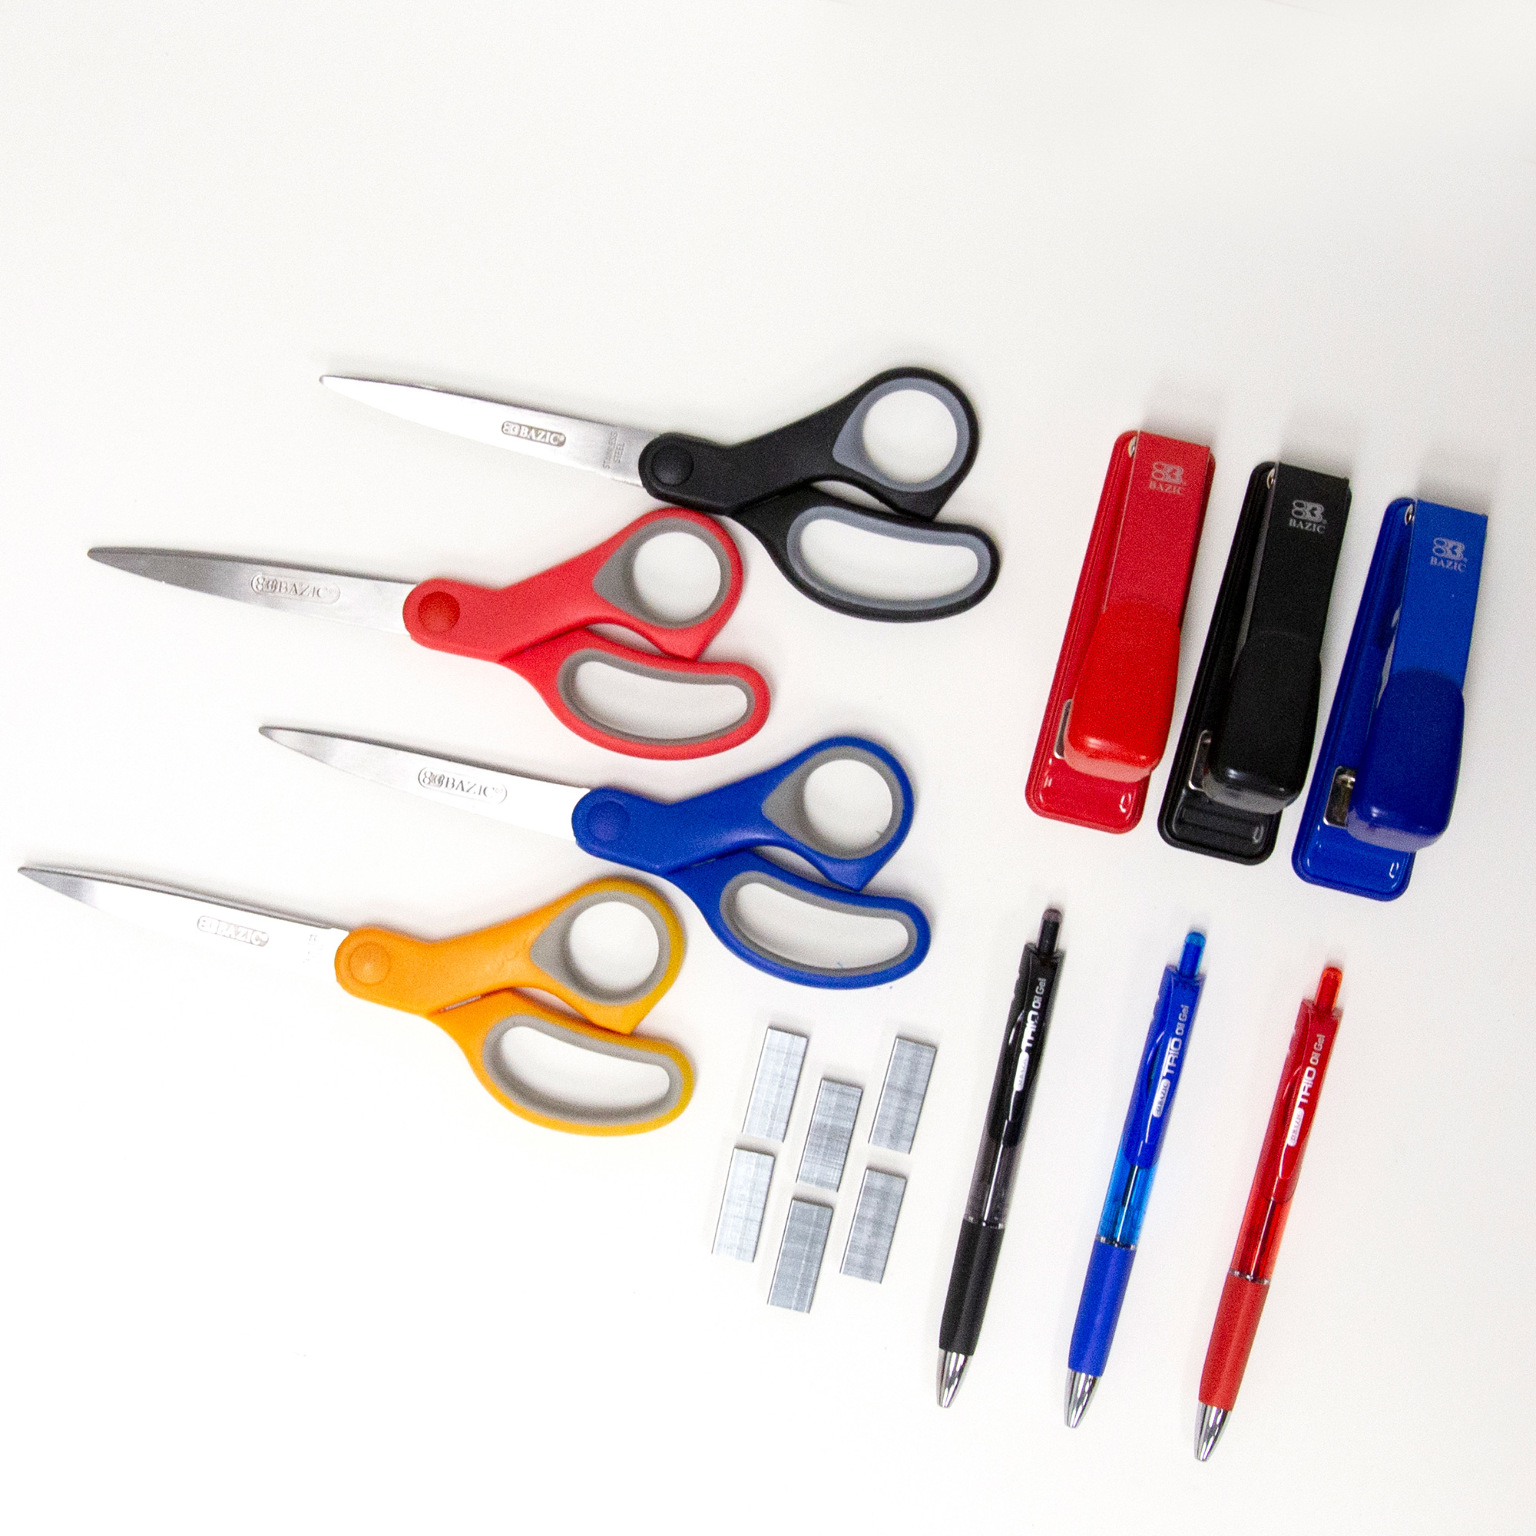 Wholesale Safety Scissors - Assorted Colors, 5 - DollarDays